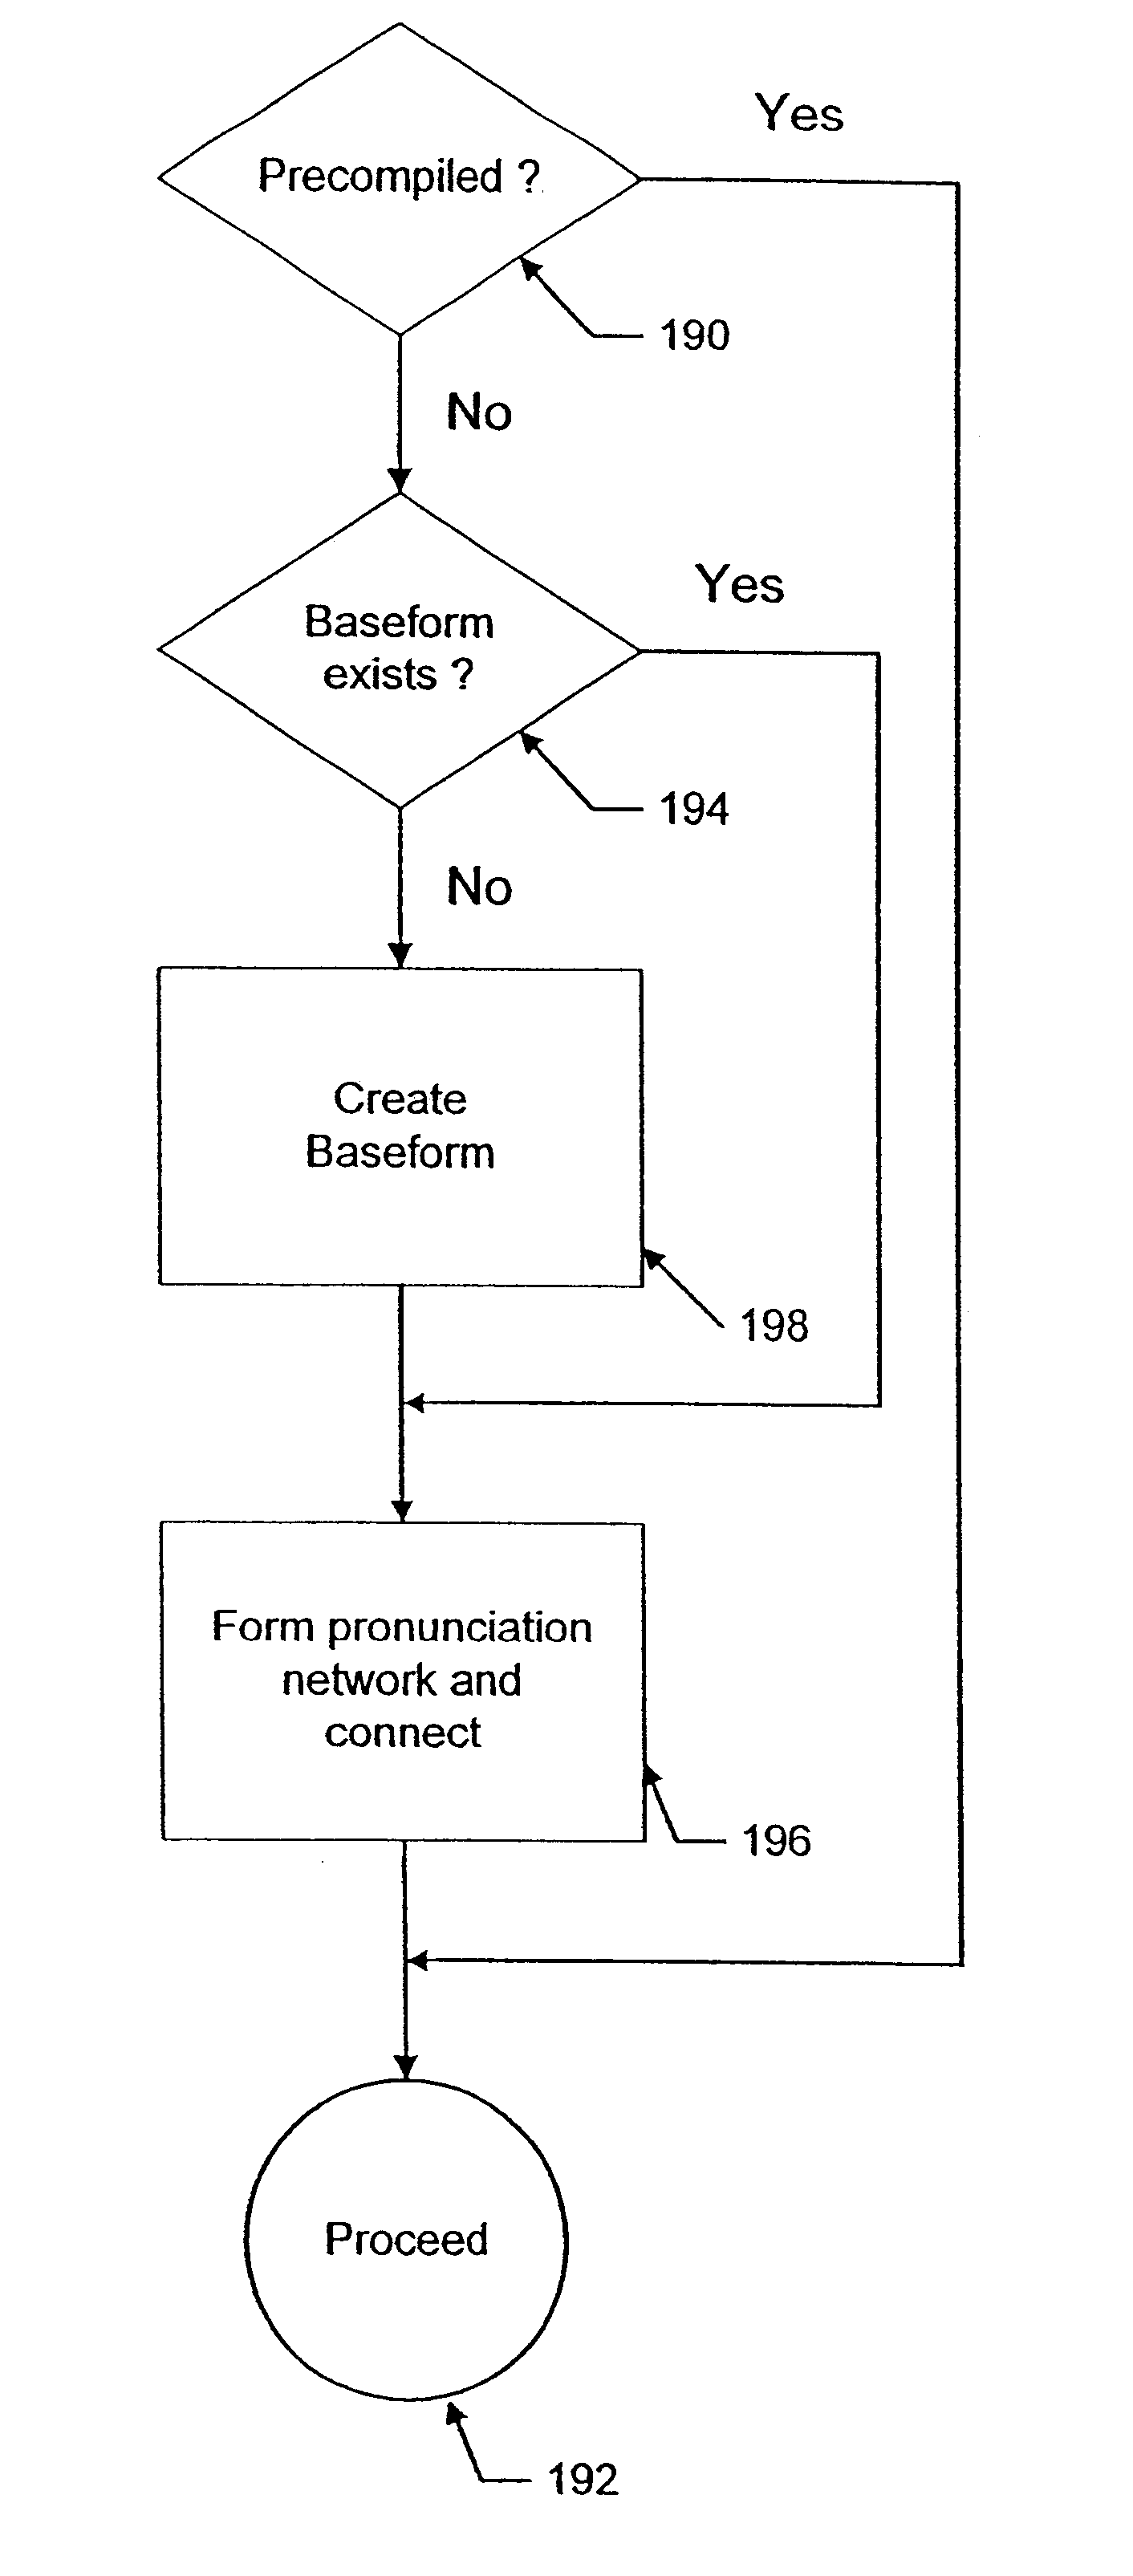 Method and apparatus for dynamic adaptation of a large vocabulary speech recognition system and for use of constraints from a database in a large vocabulary speech recognition system